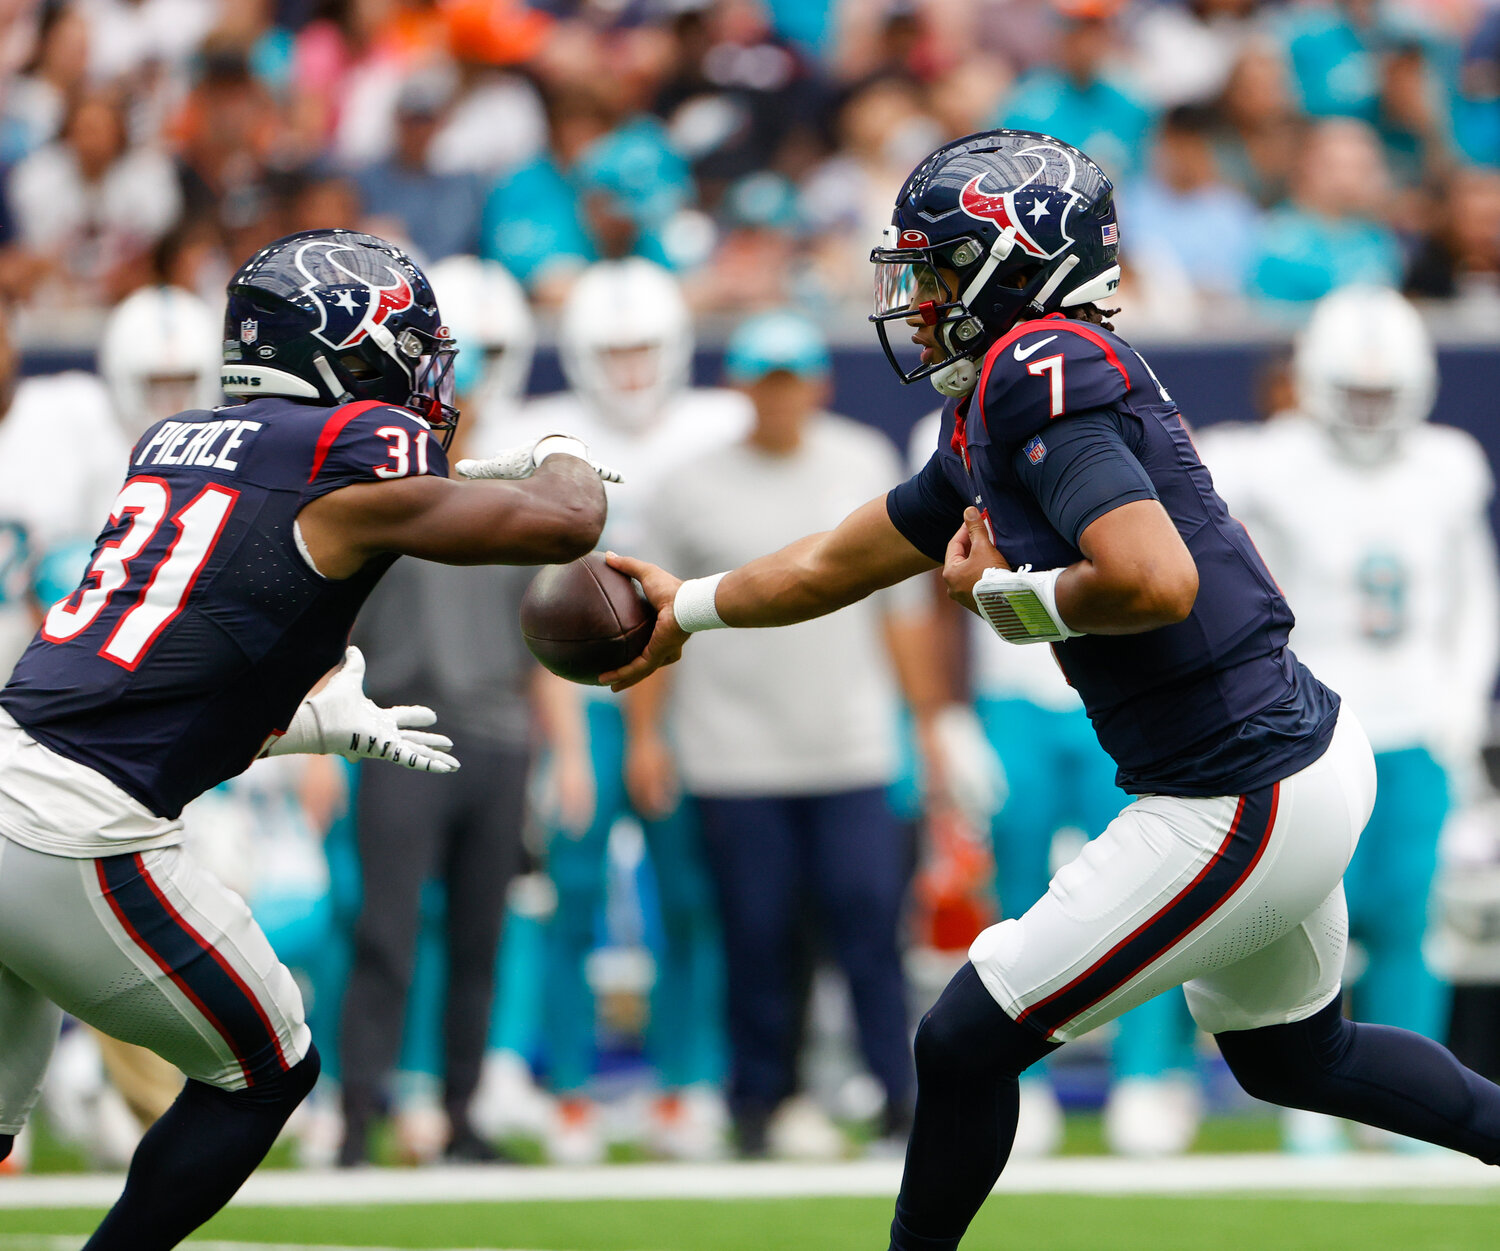 Houston Texans quarterback C.J. Stroud (7) hands the ball off to running back Dameon Pierce (31) during an NFL preseason game between the Texans and the Dolphins Jaguars on August 19, 2023 in Houston.